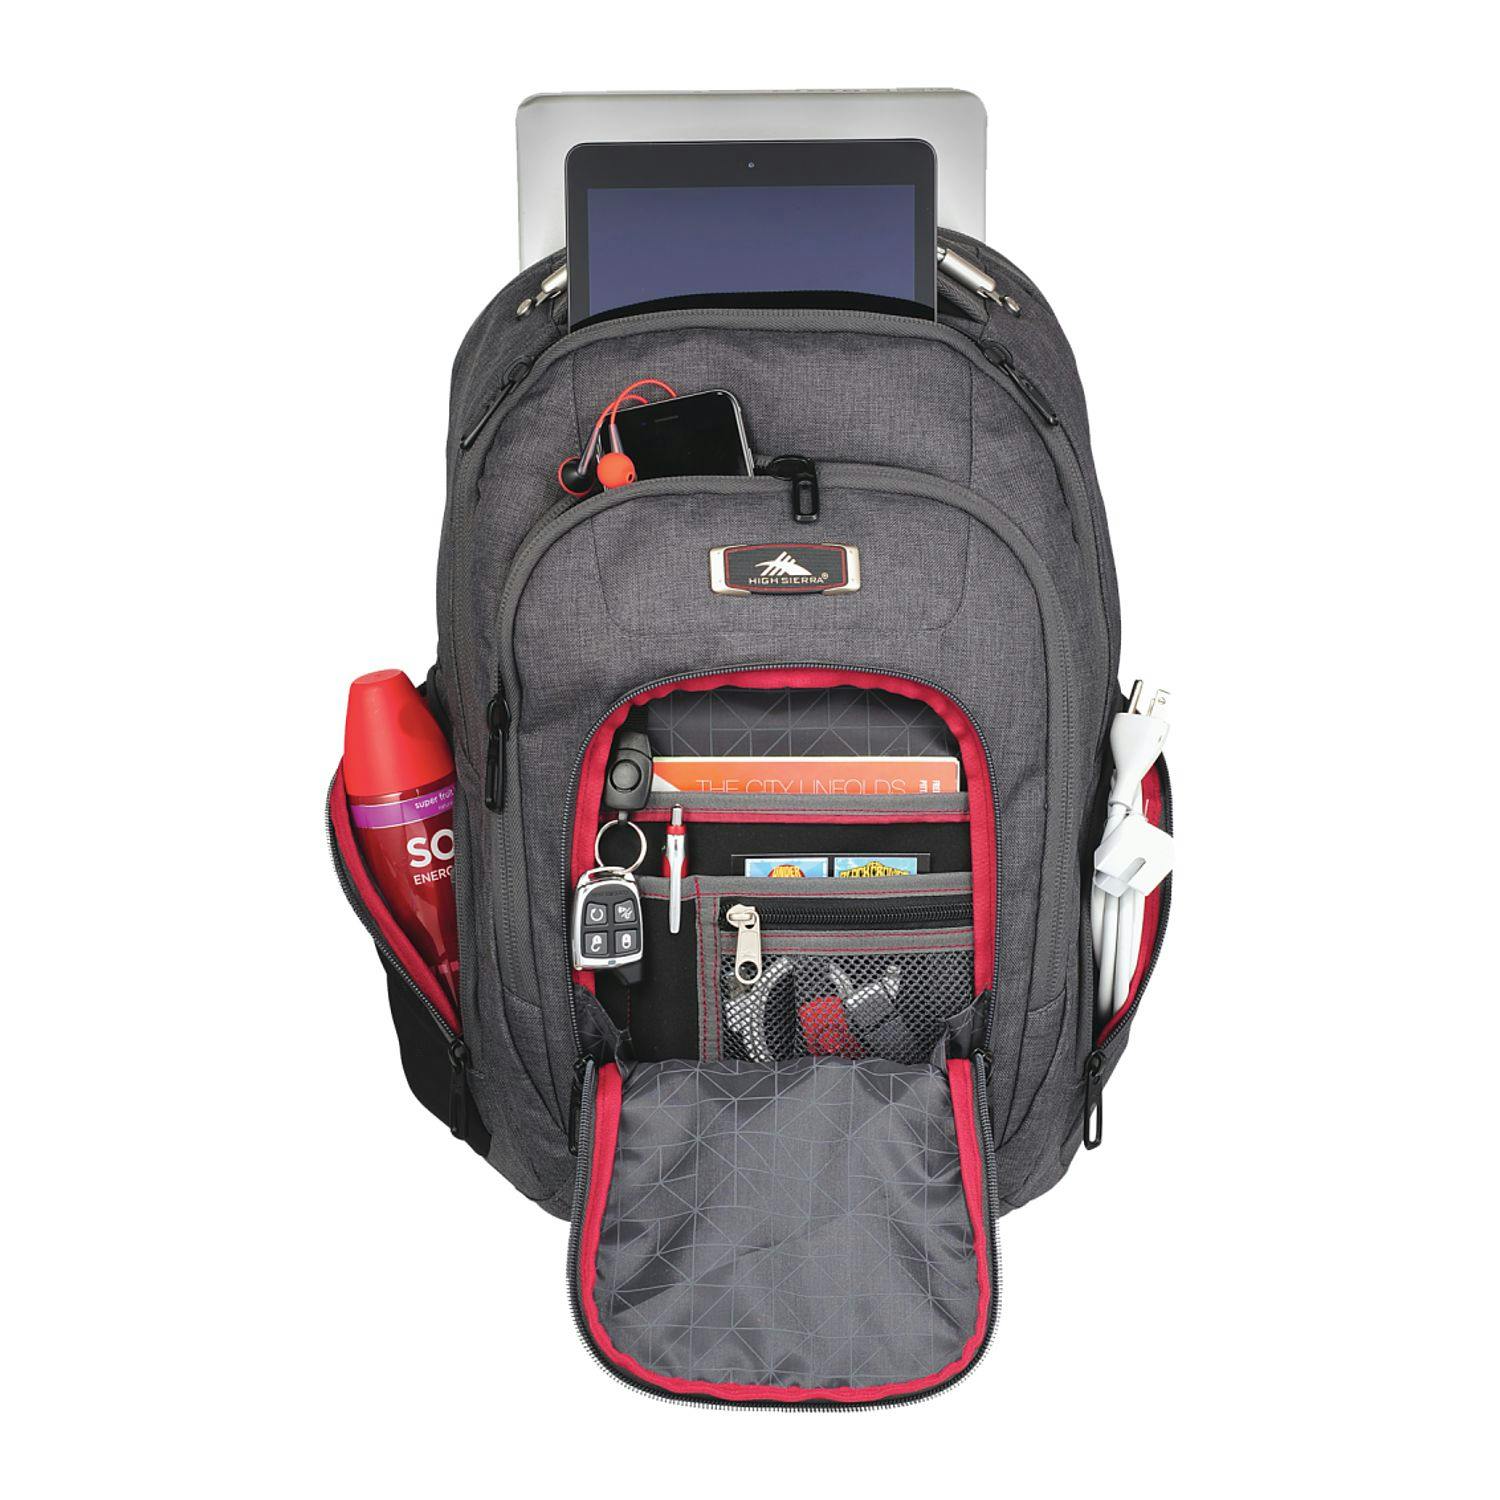 High Sierra 17" Computer UBT Deluxe Backpack - additional Image 3